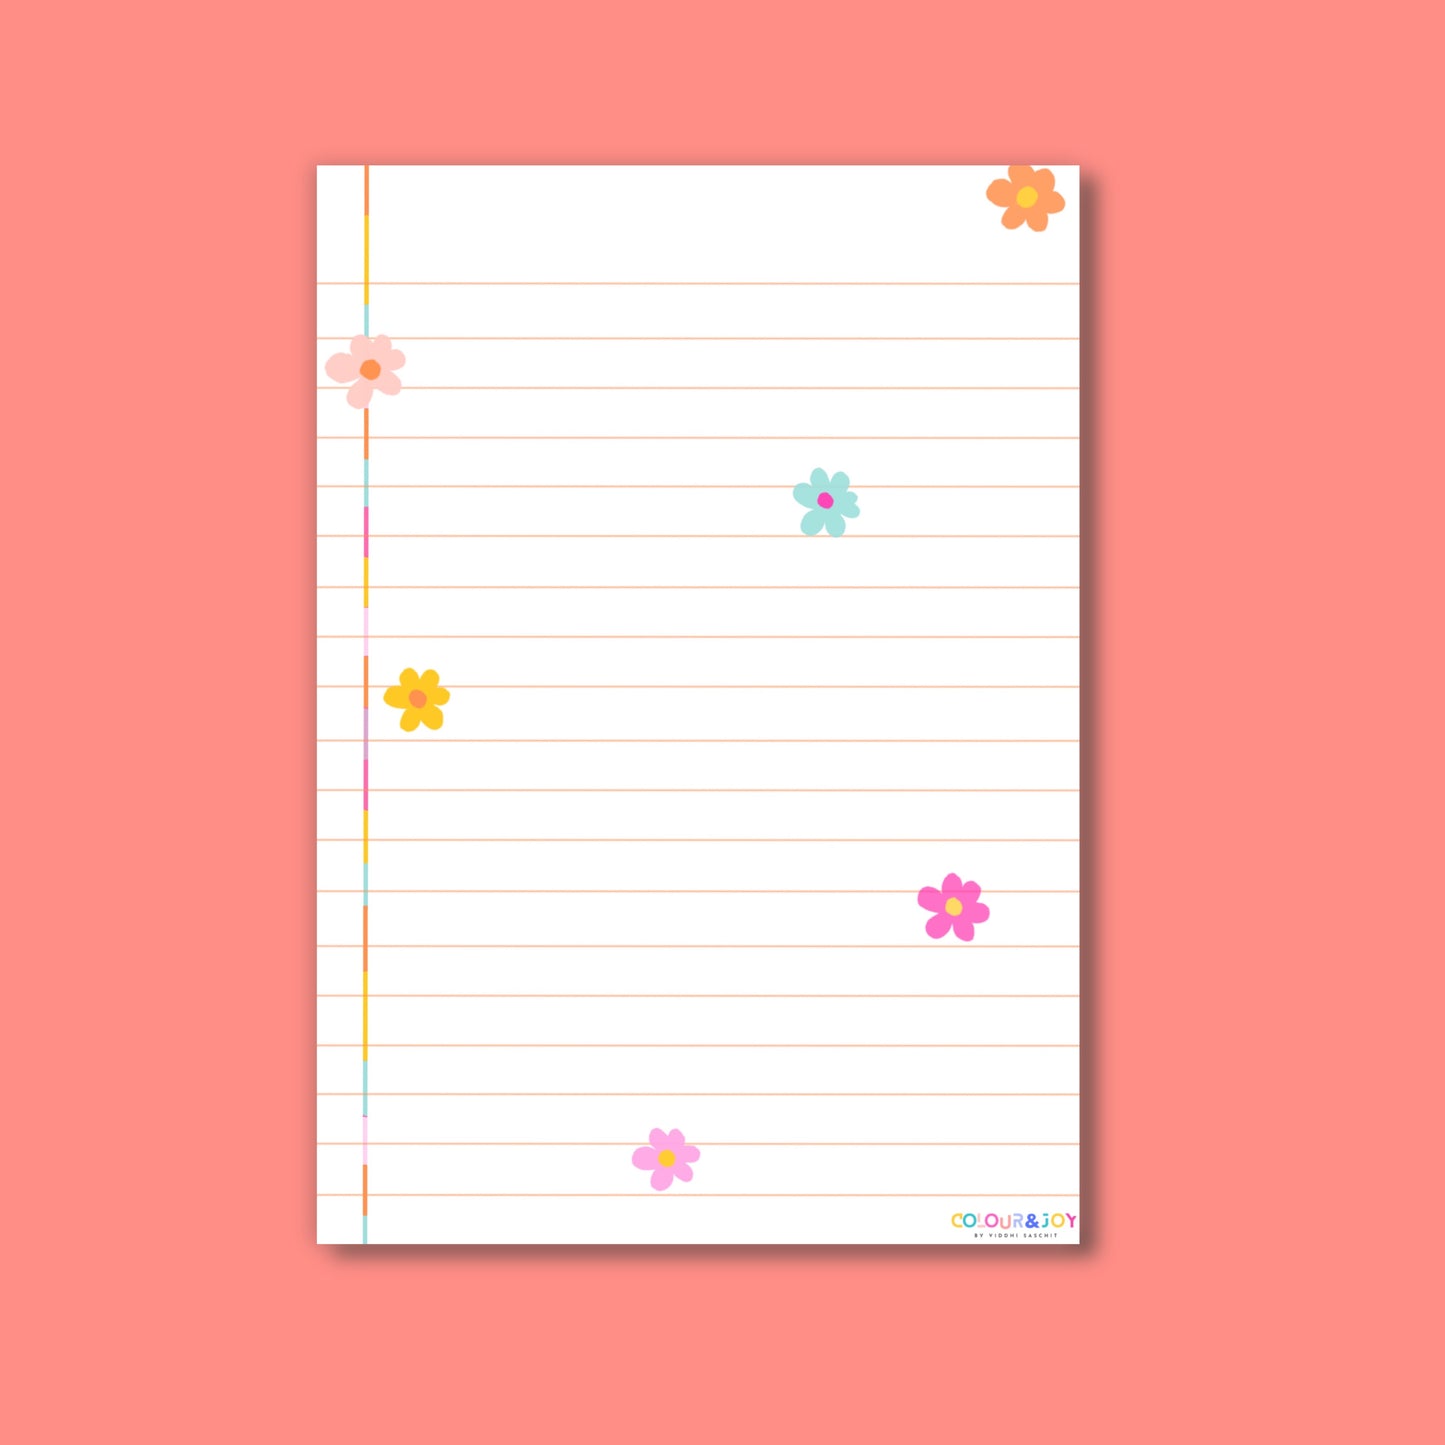 Notes with Dainty Florals - A4 (8.3"x11.7")